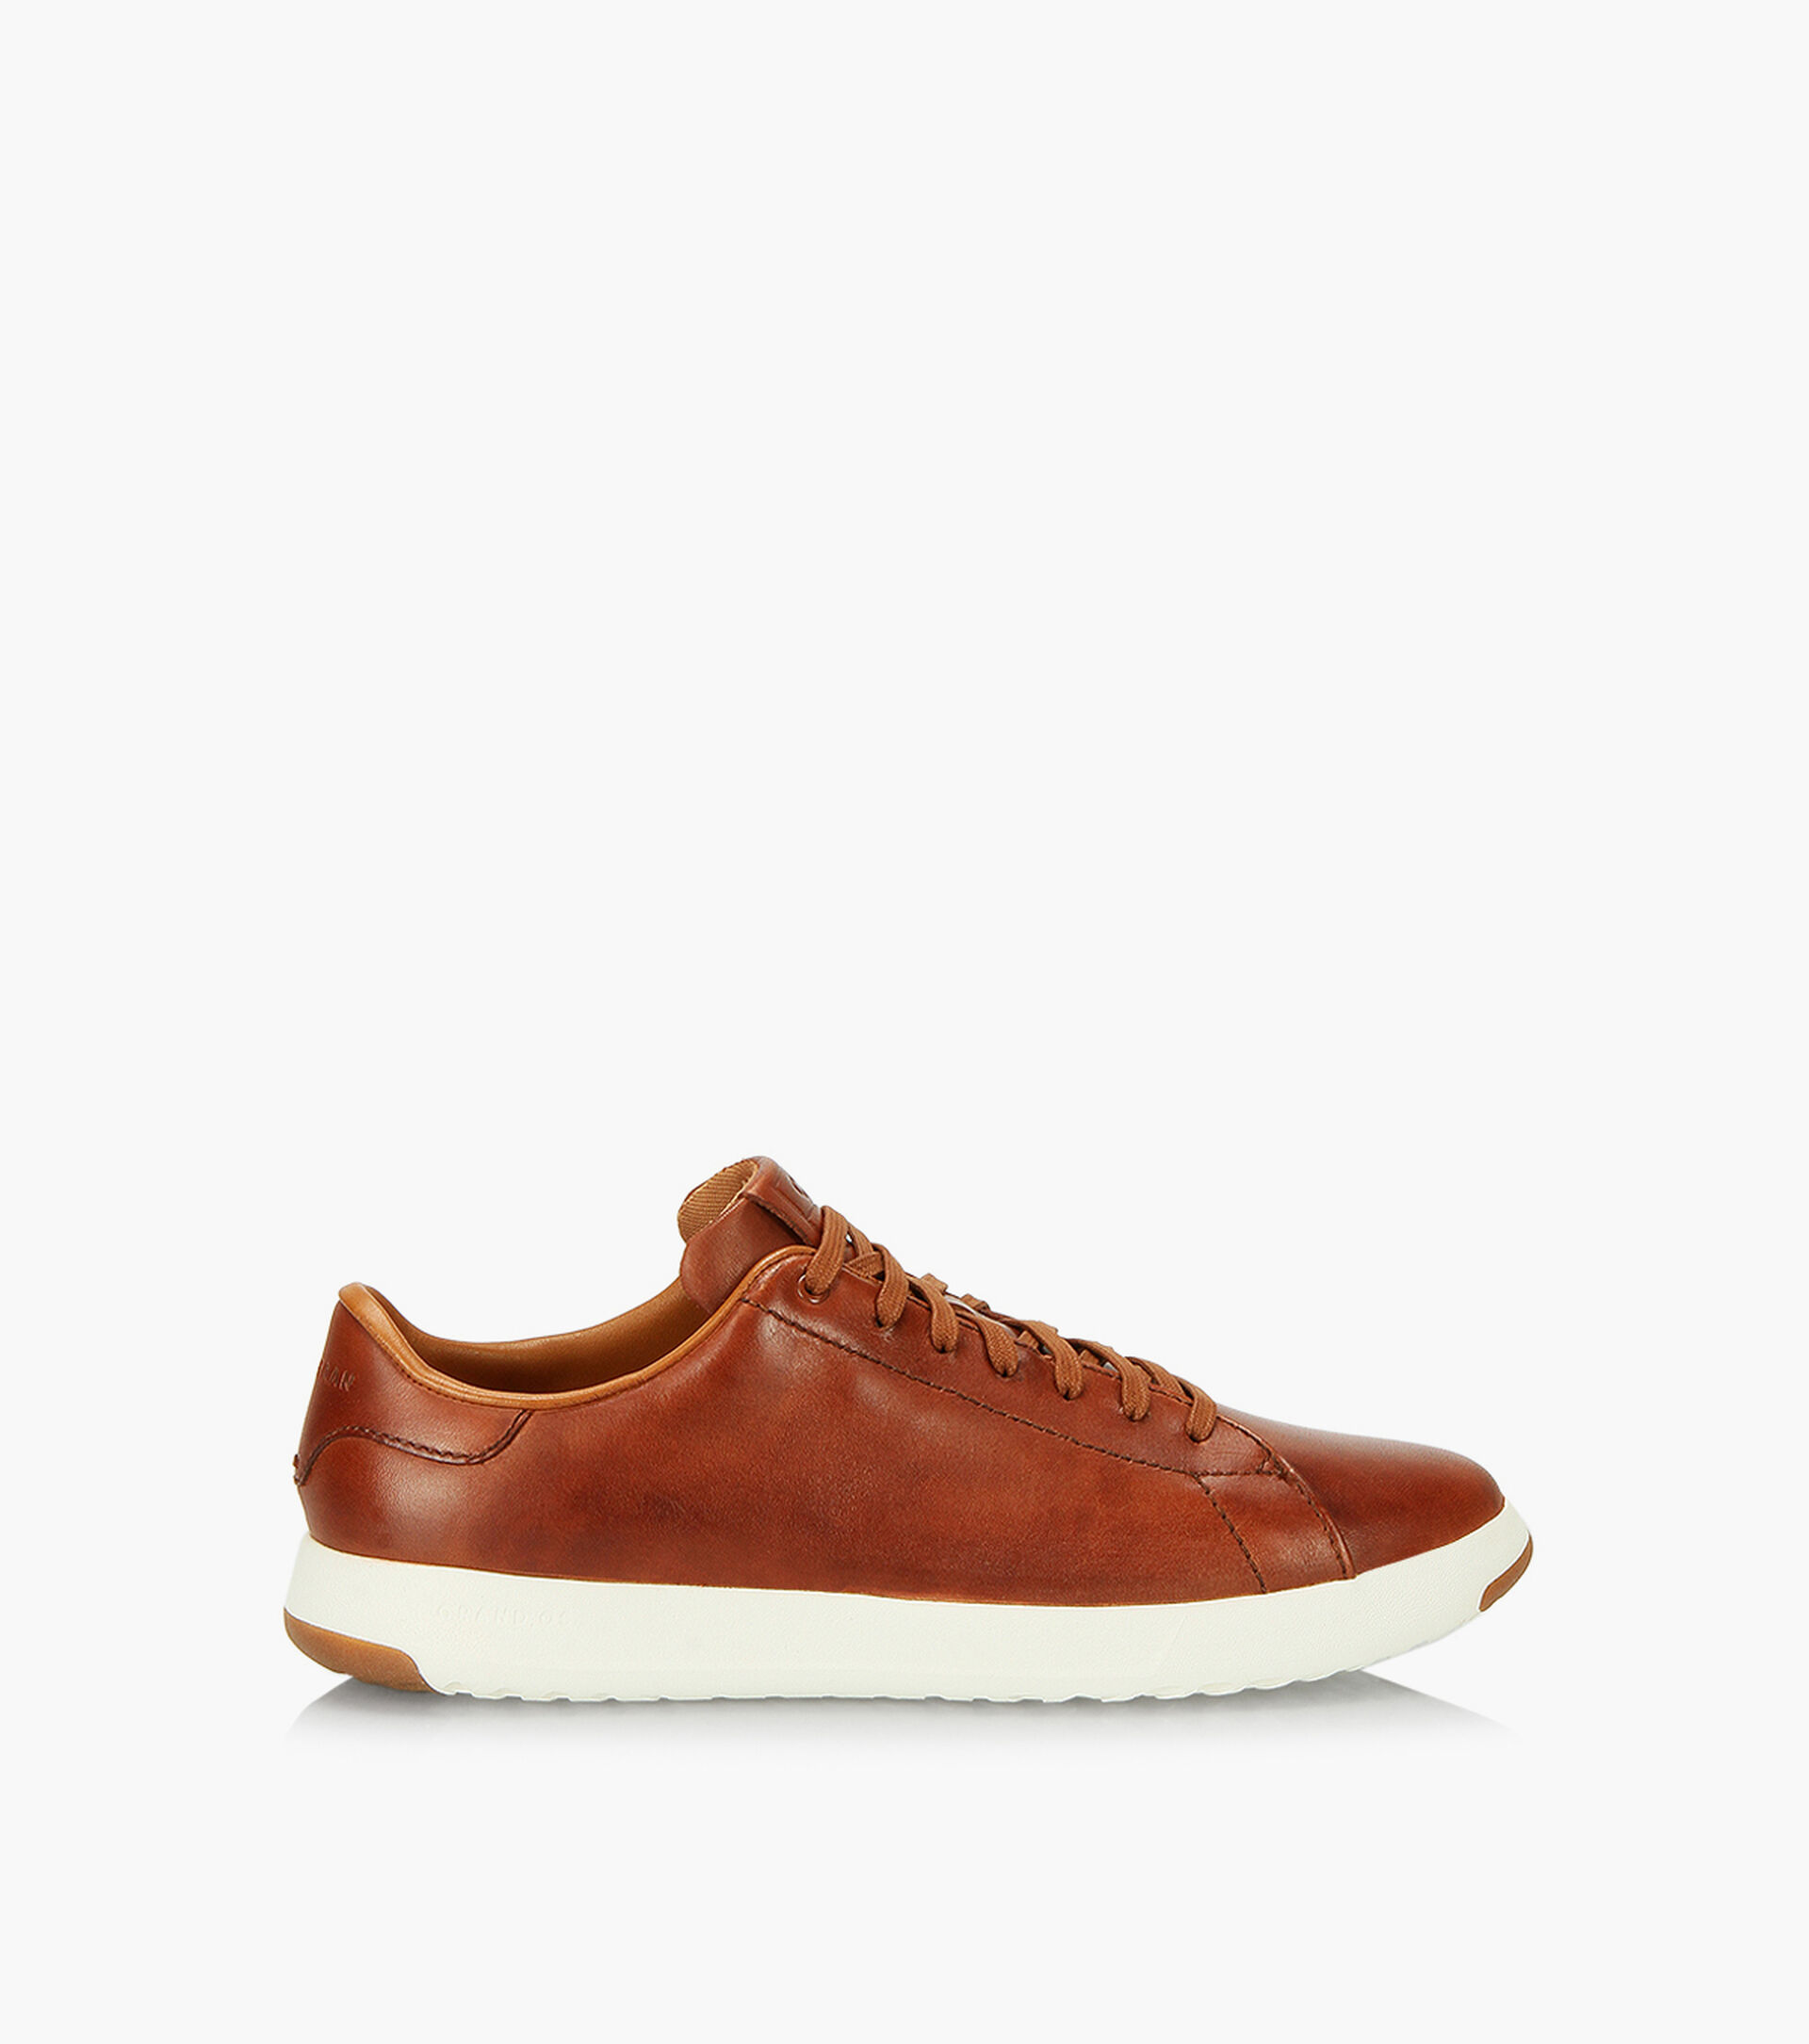 COLE HAAN GRANDPRO TENNIS - Leather | Browns Shoes